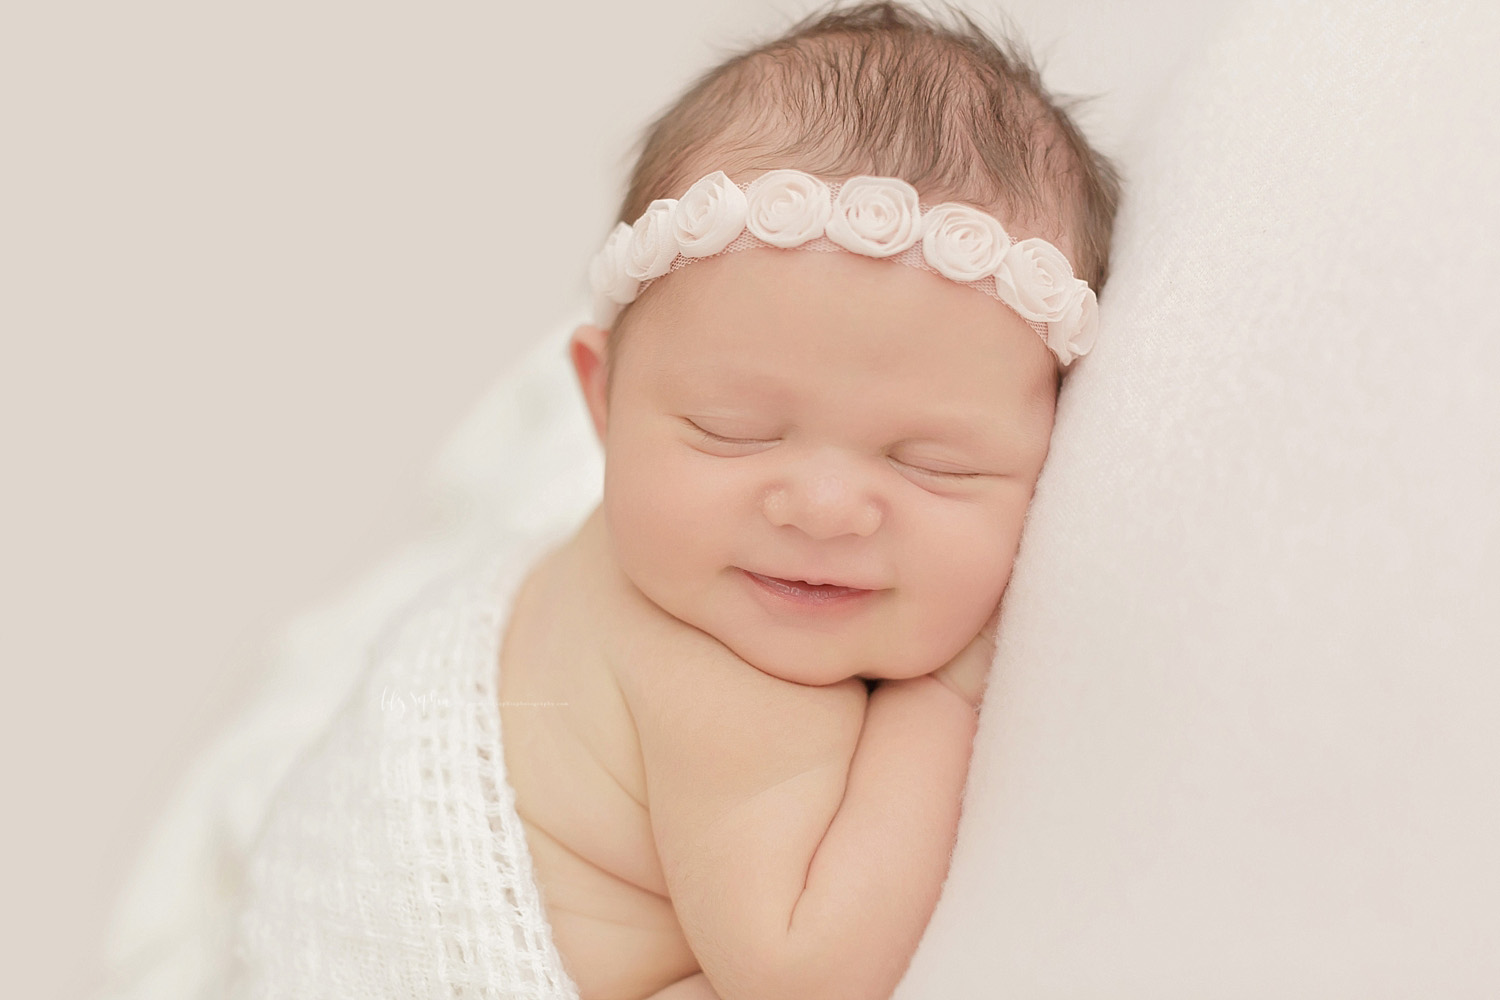  Close up image of a newborn, baby, girl, grinning in her sleep, with her hands tucked under her chin.&nbsp; 